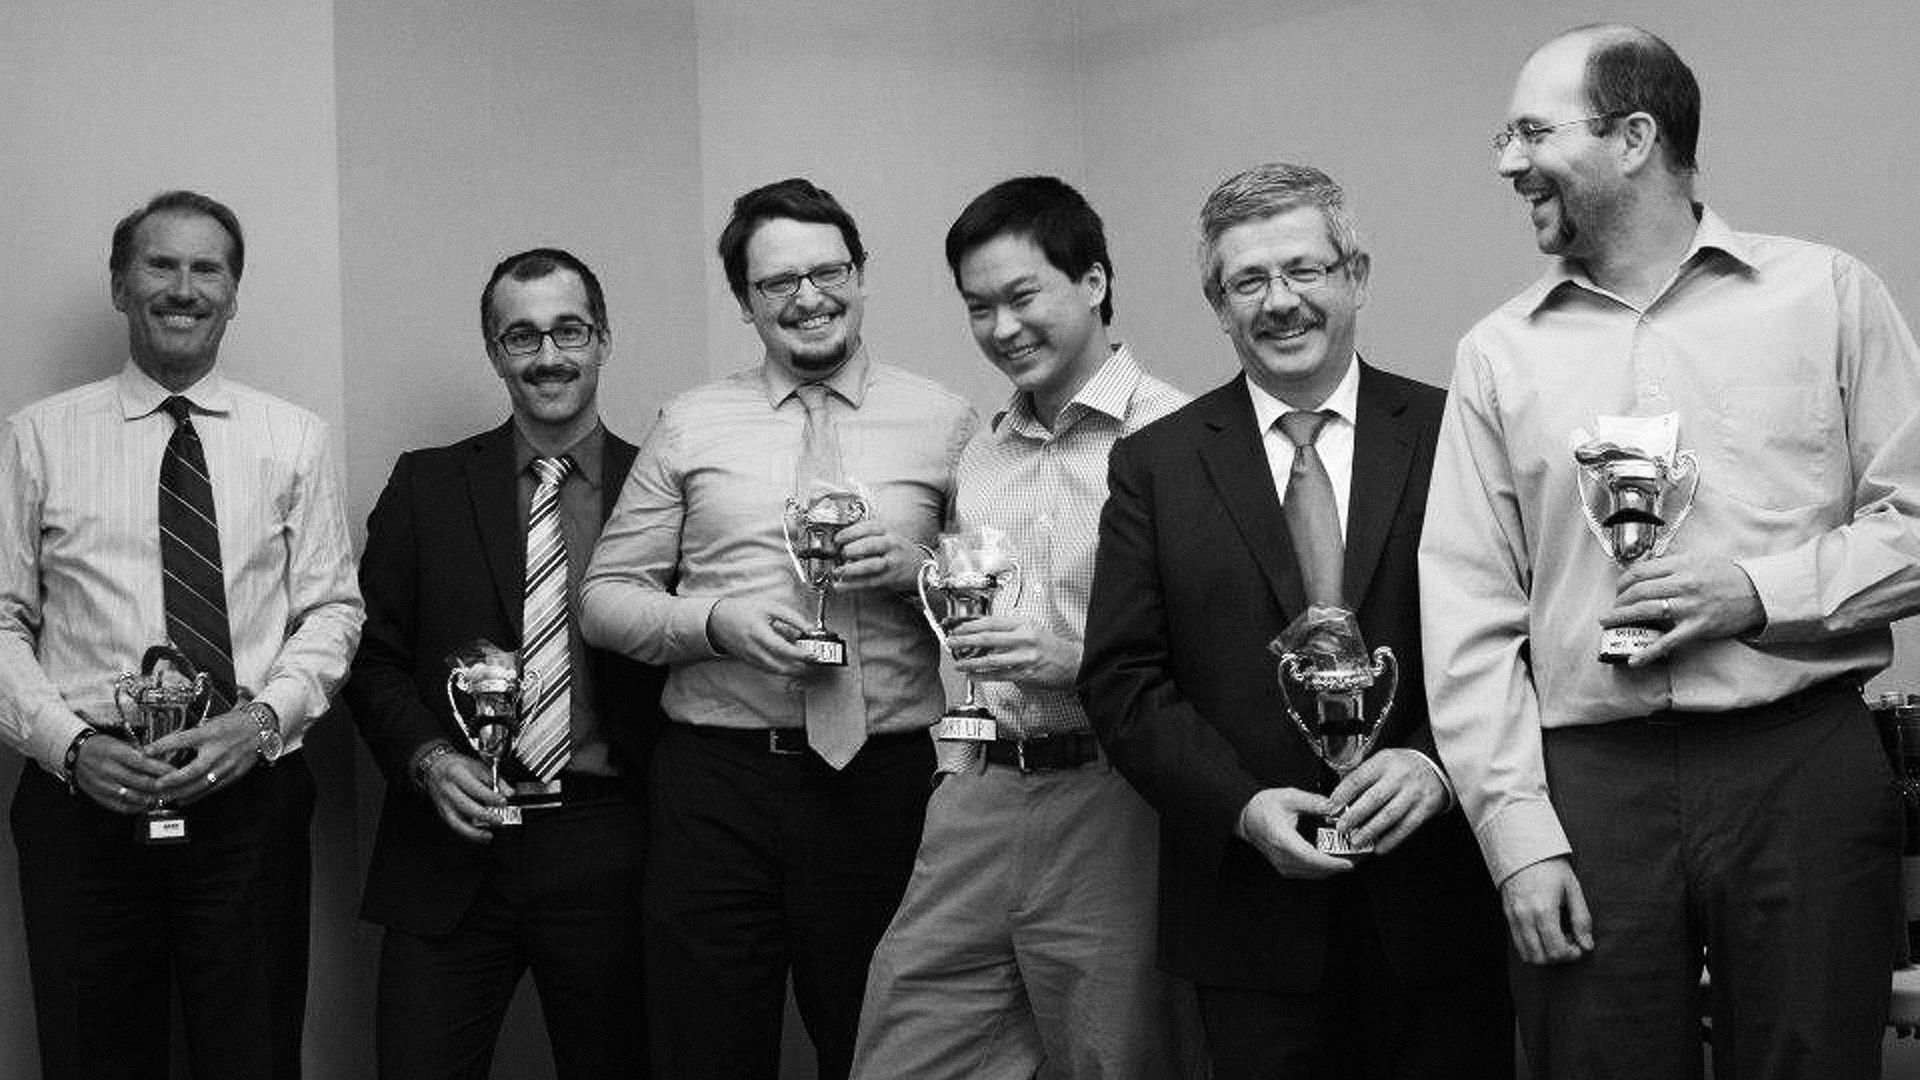 A group of colleagues in suit and tie, all sporting moustaches, hold trophies that also have moustaches on them